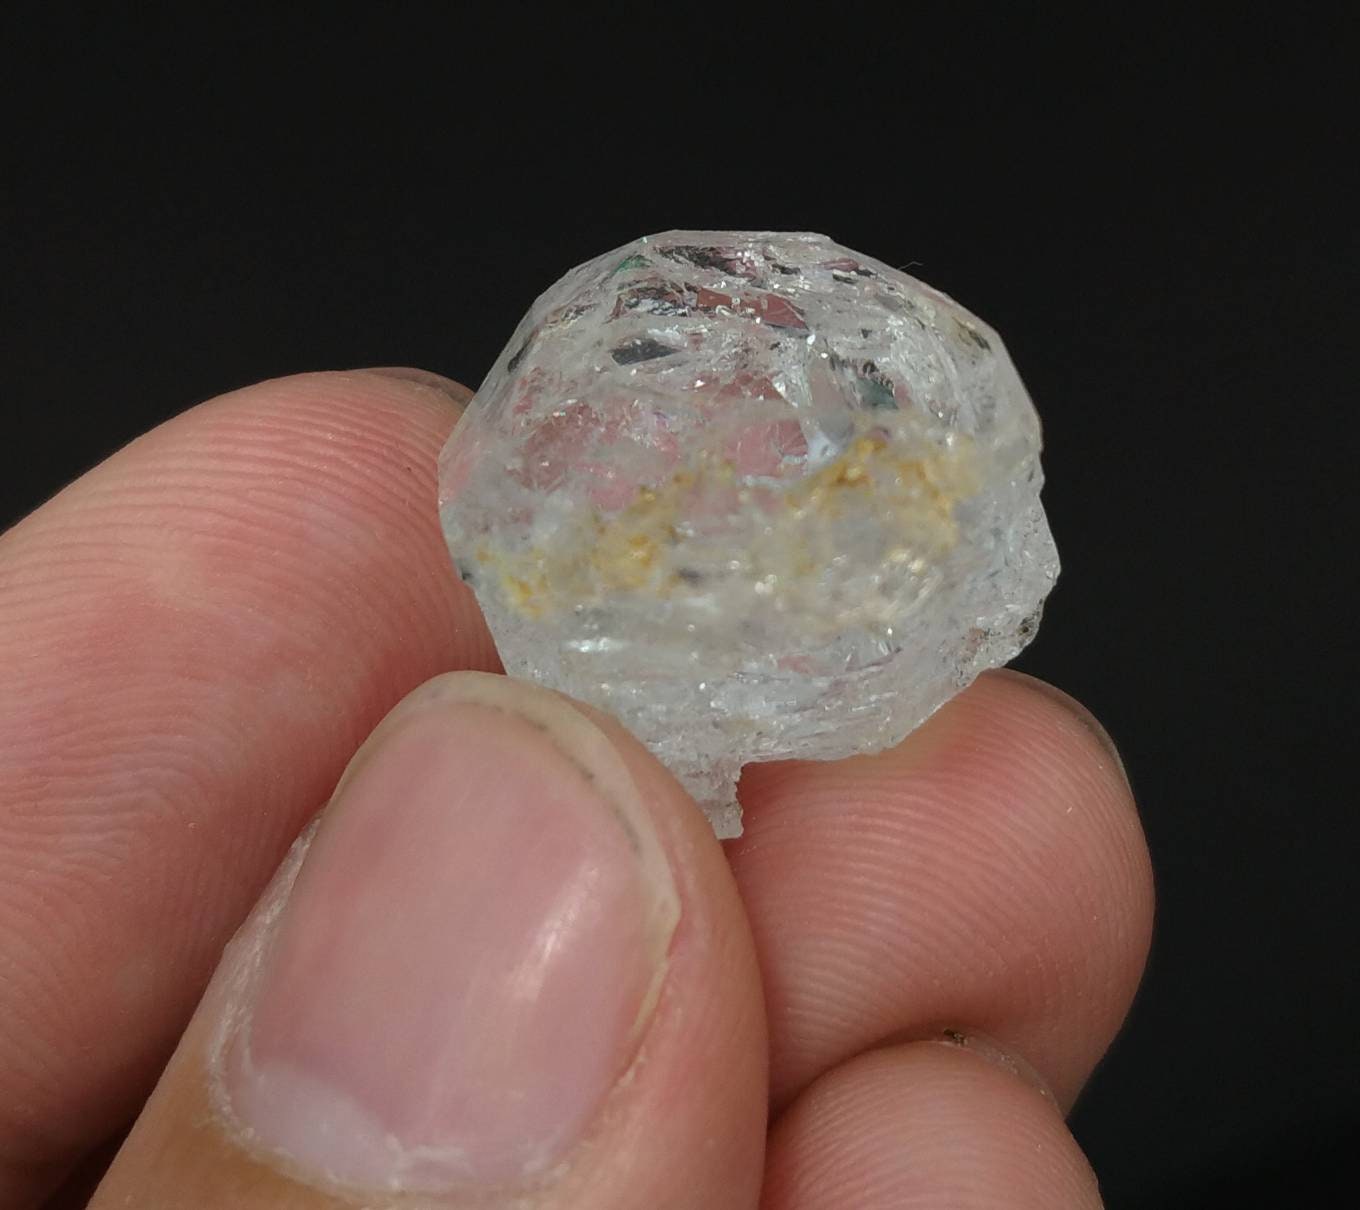 ARSAA GEMS AND MINERALSEtched gemmy clear transparent white Beryl crystal from Skardu GilgitBaltistan Pakistan, weight 6.3 grams - Premium  from ARSAA GEMS AND MINERALS - Just $33.00! Shop now at ARSAA GEMS AND MINERALS